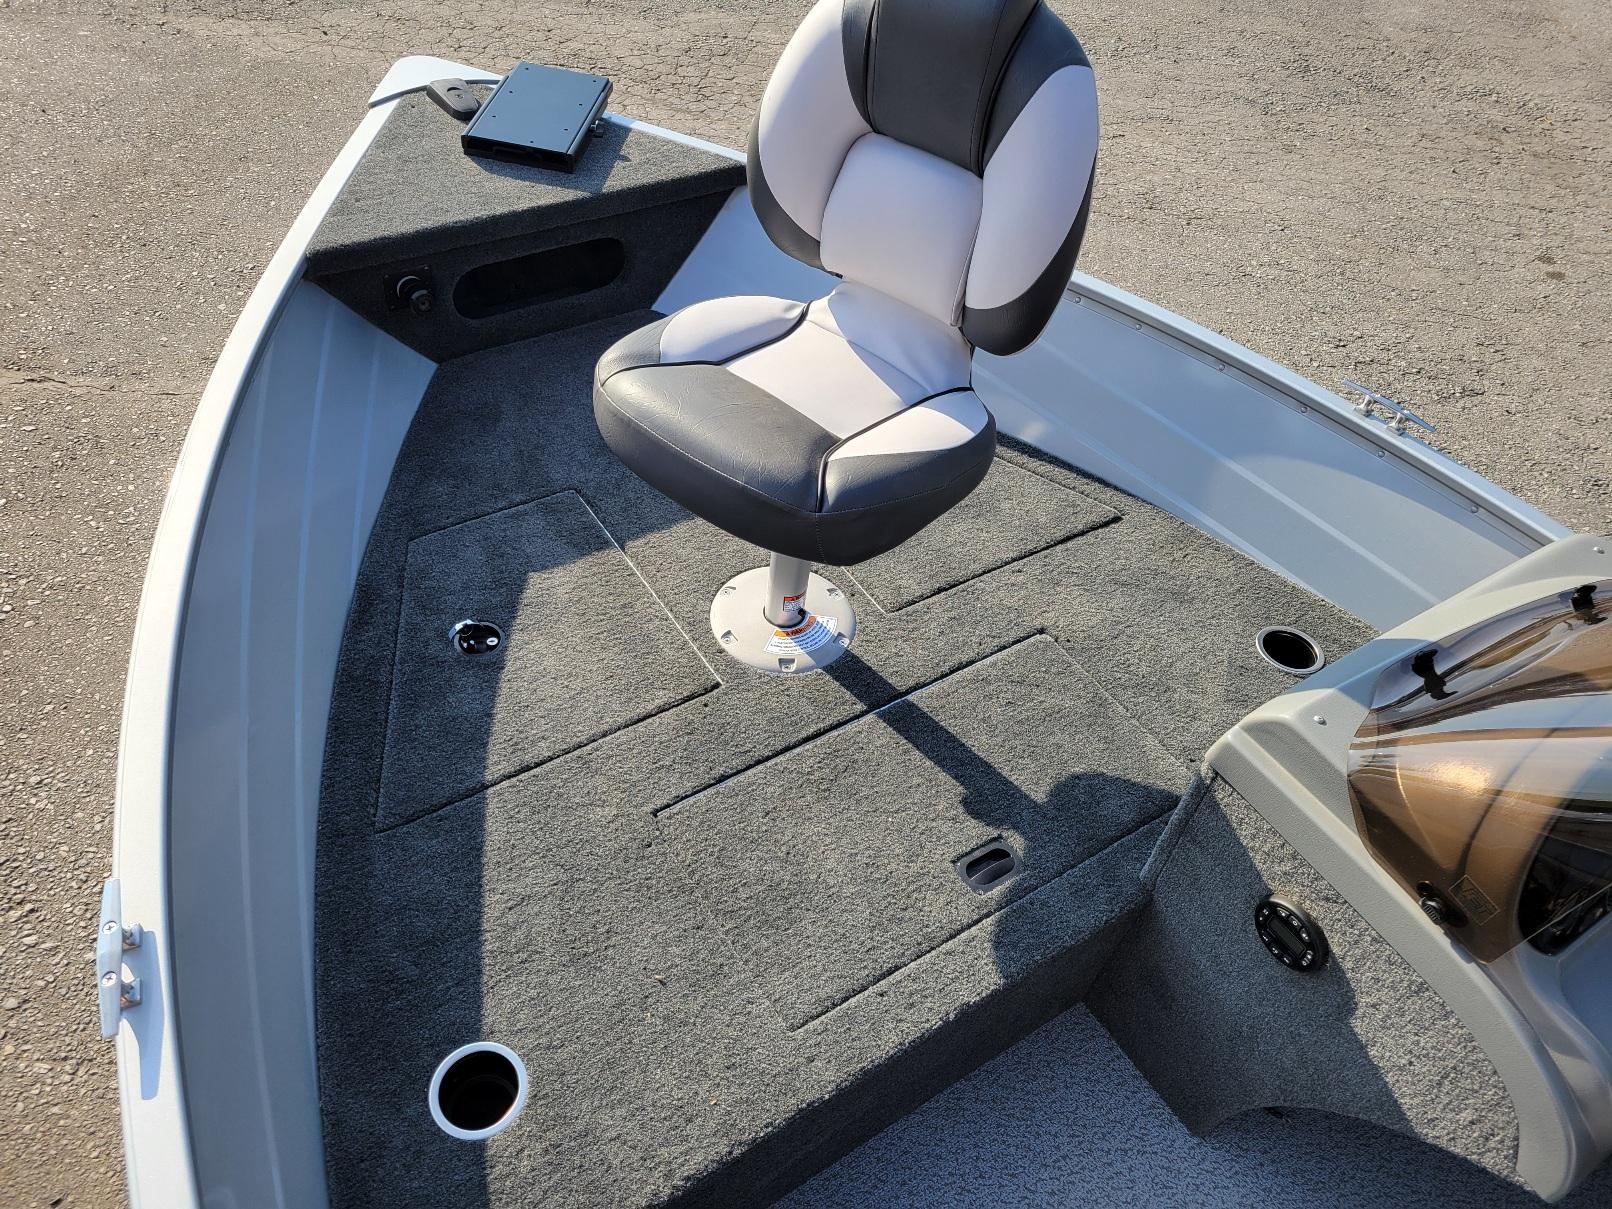 2024 Smoker Craft Pro Angler 161. 16' side console. (In stock!)